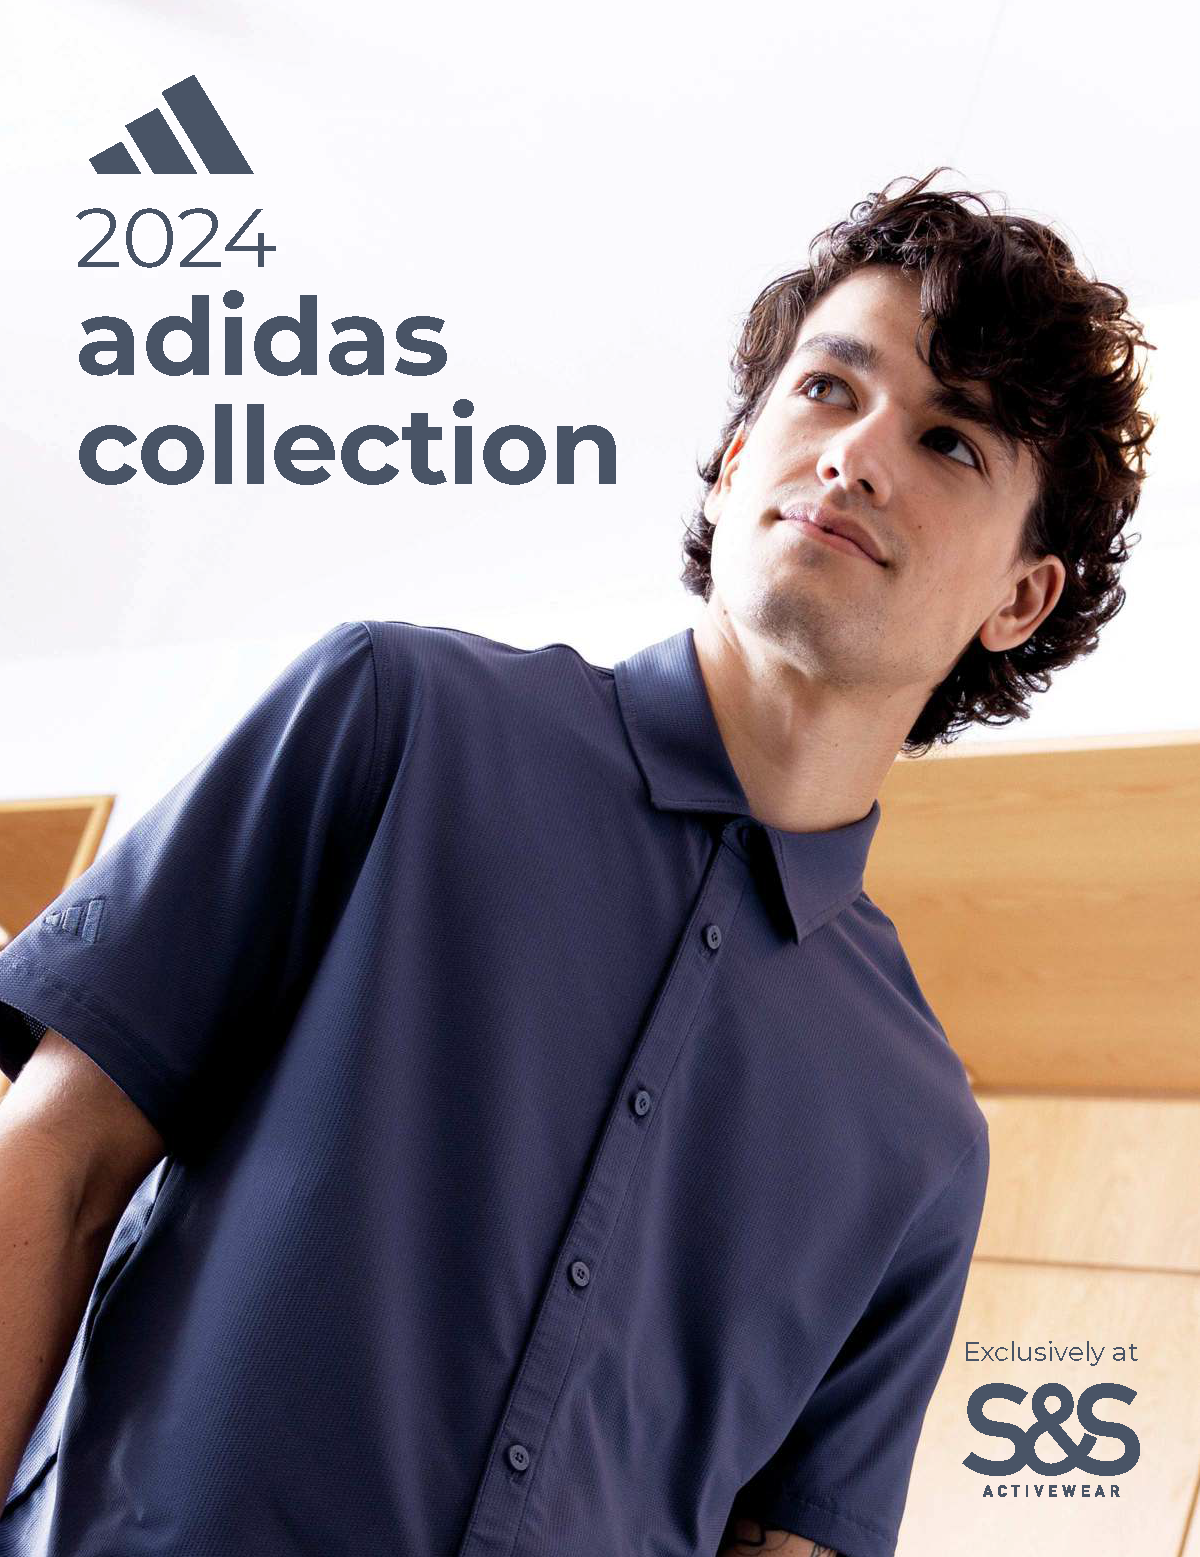 s-and-s-adidas-2024-372b64d3